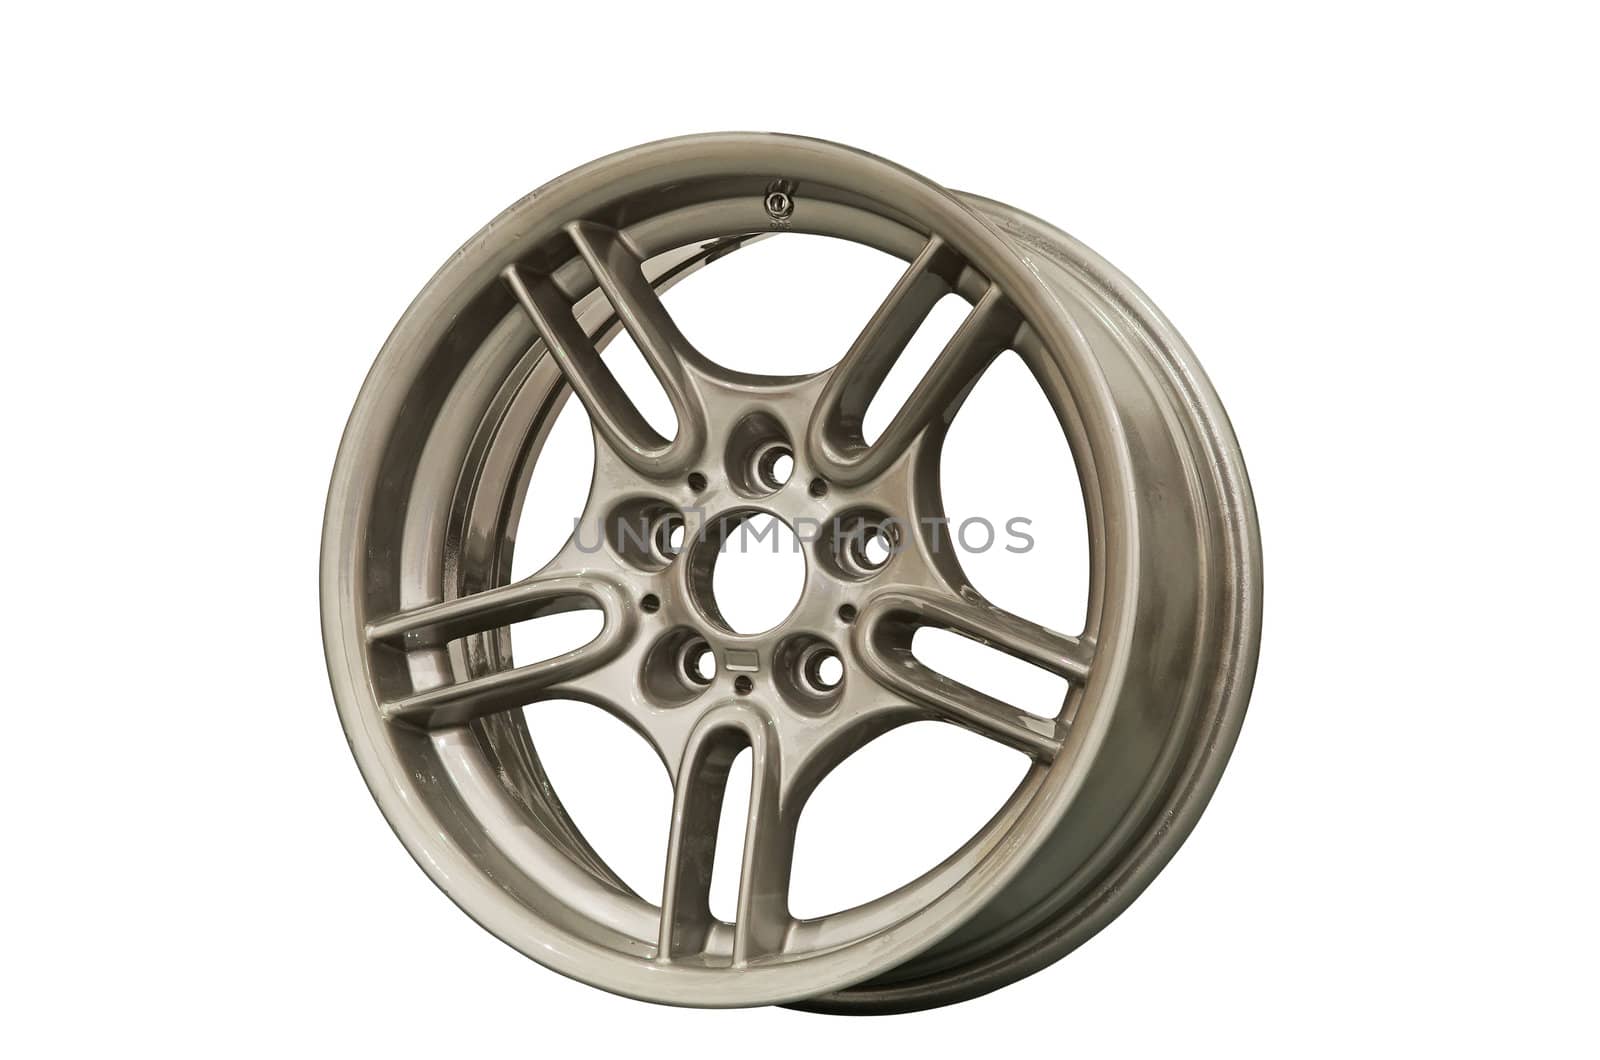 Sport alloy rims by savcoco